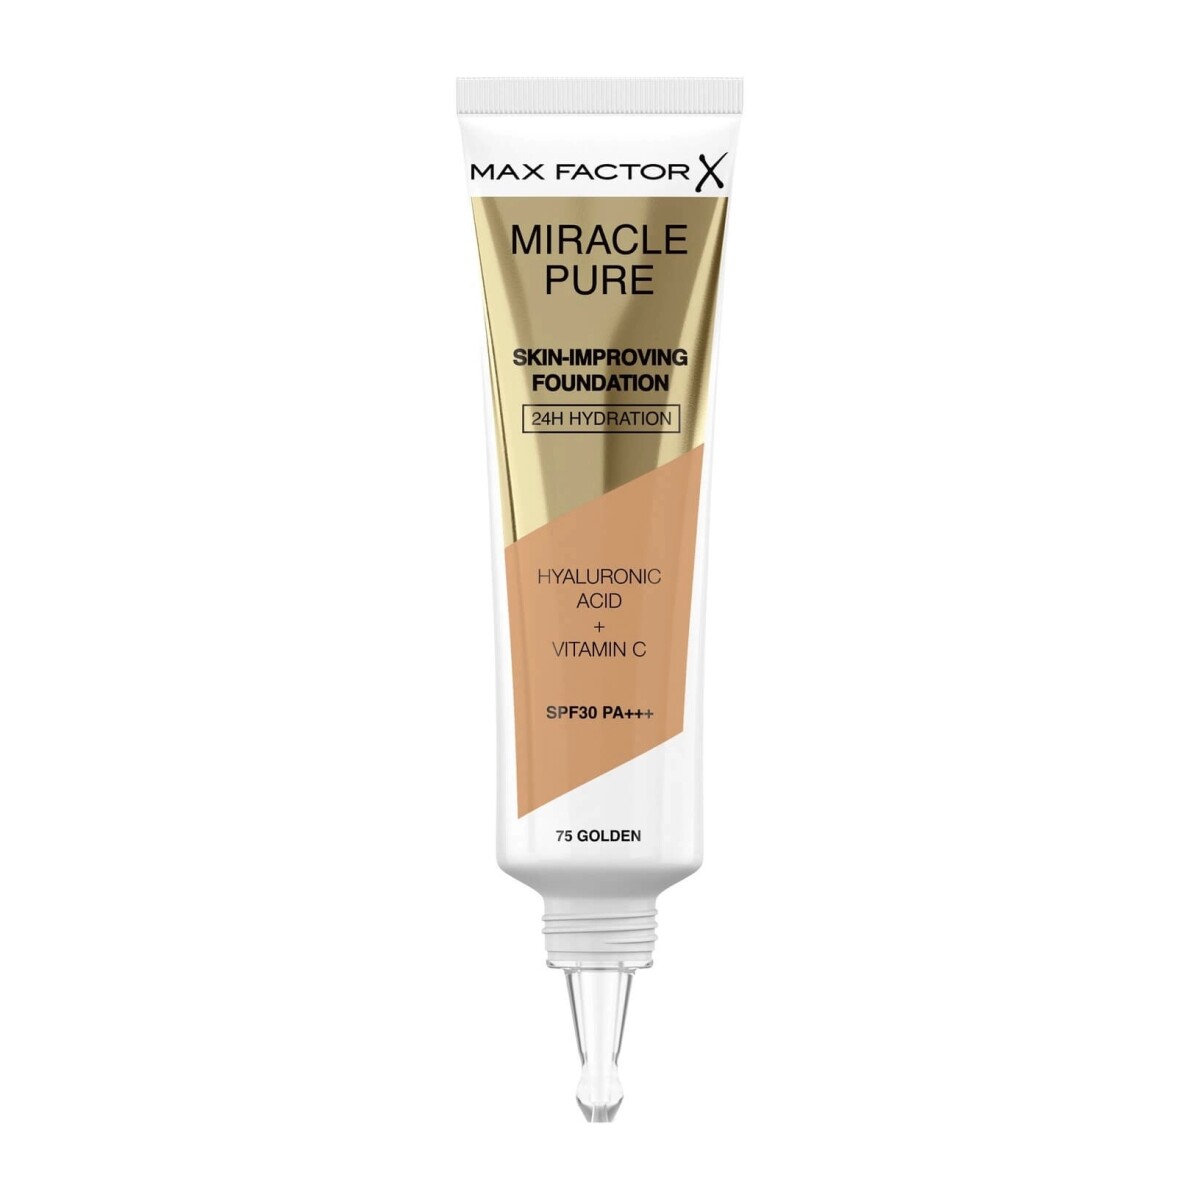 Mf Miracle Pure Foundation Golden #75 